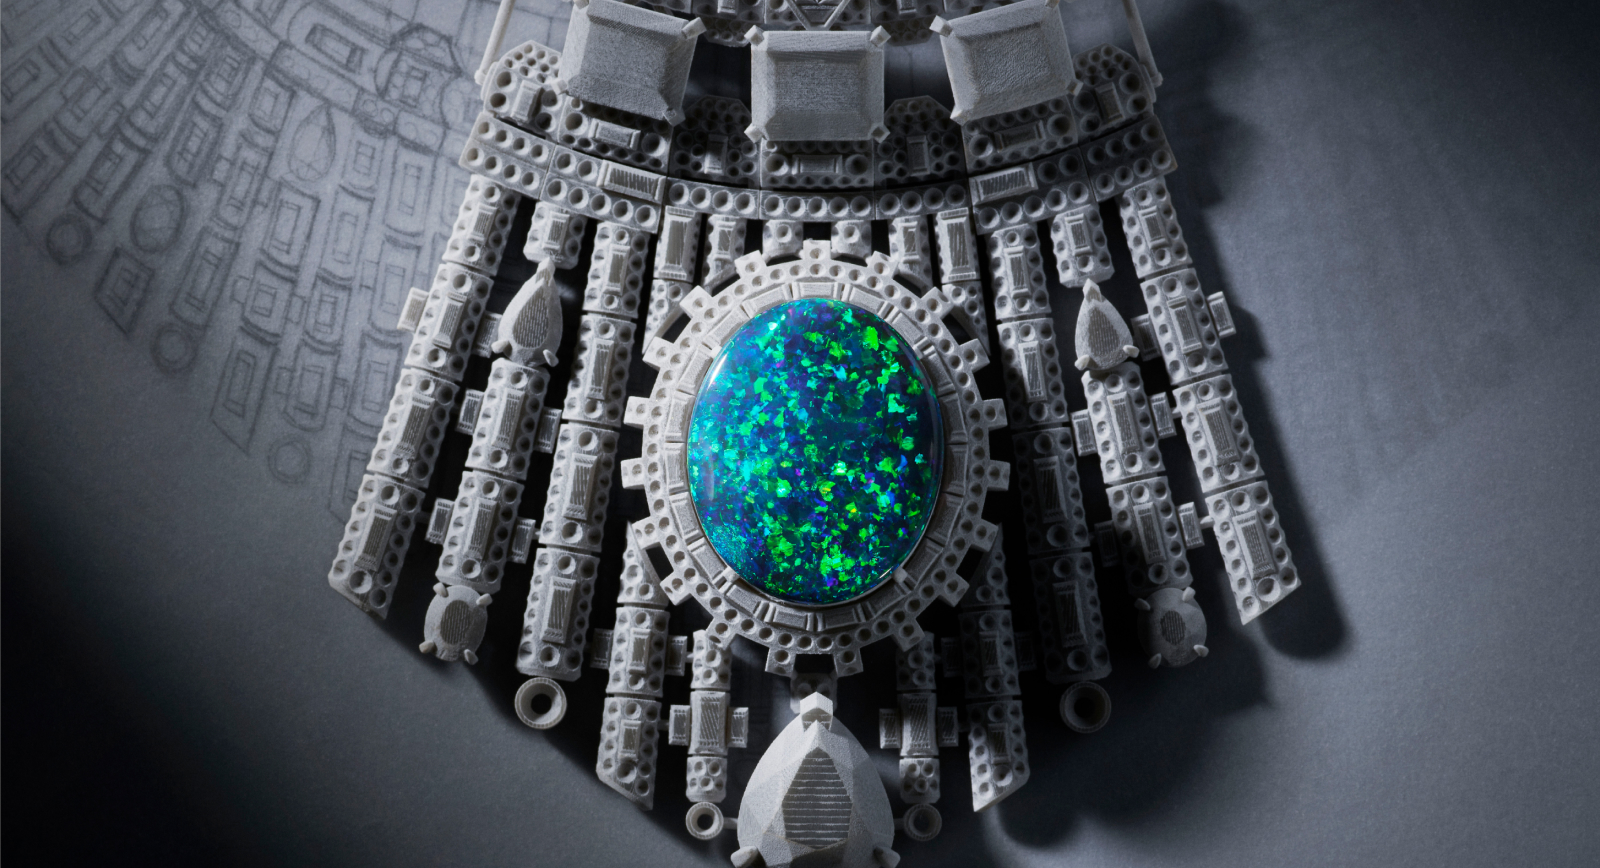 Opals: the captivating chameleons of the high jewellery world